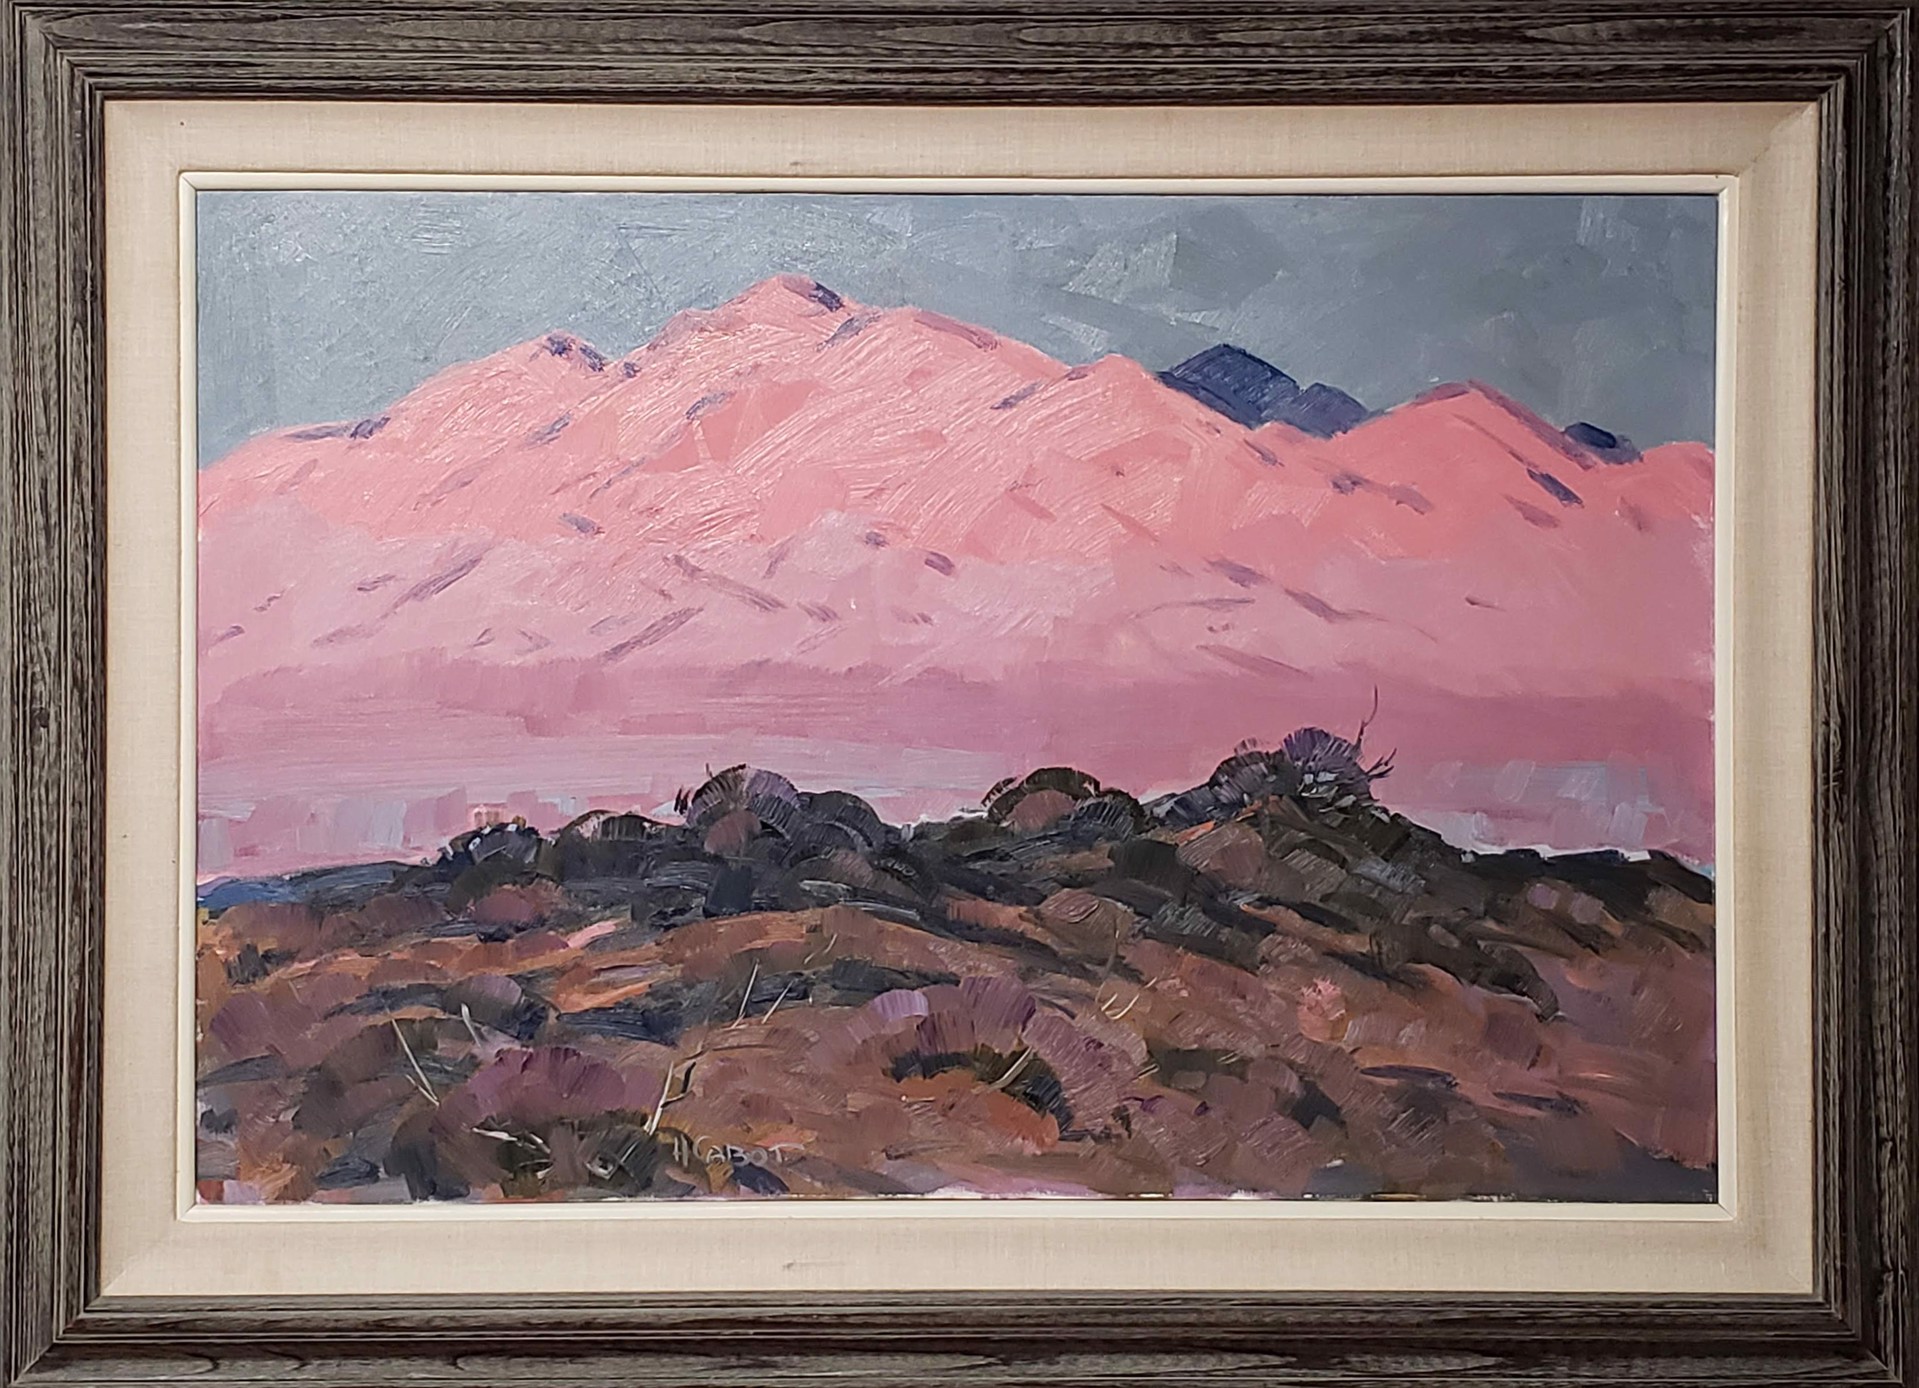 When the Mountains Gets Pink by Originals Hugh Cabot